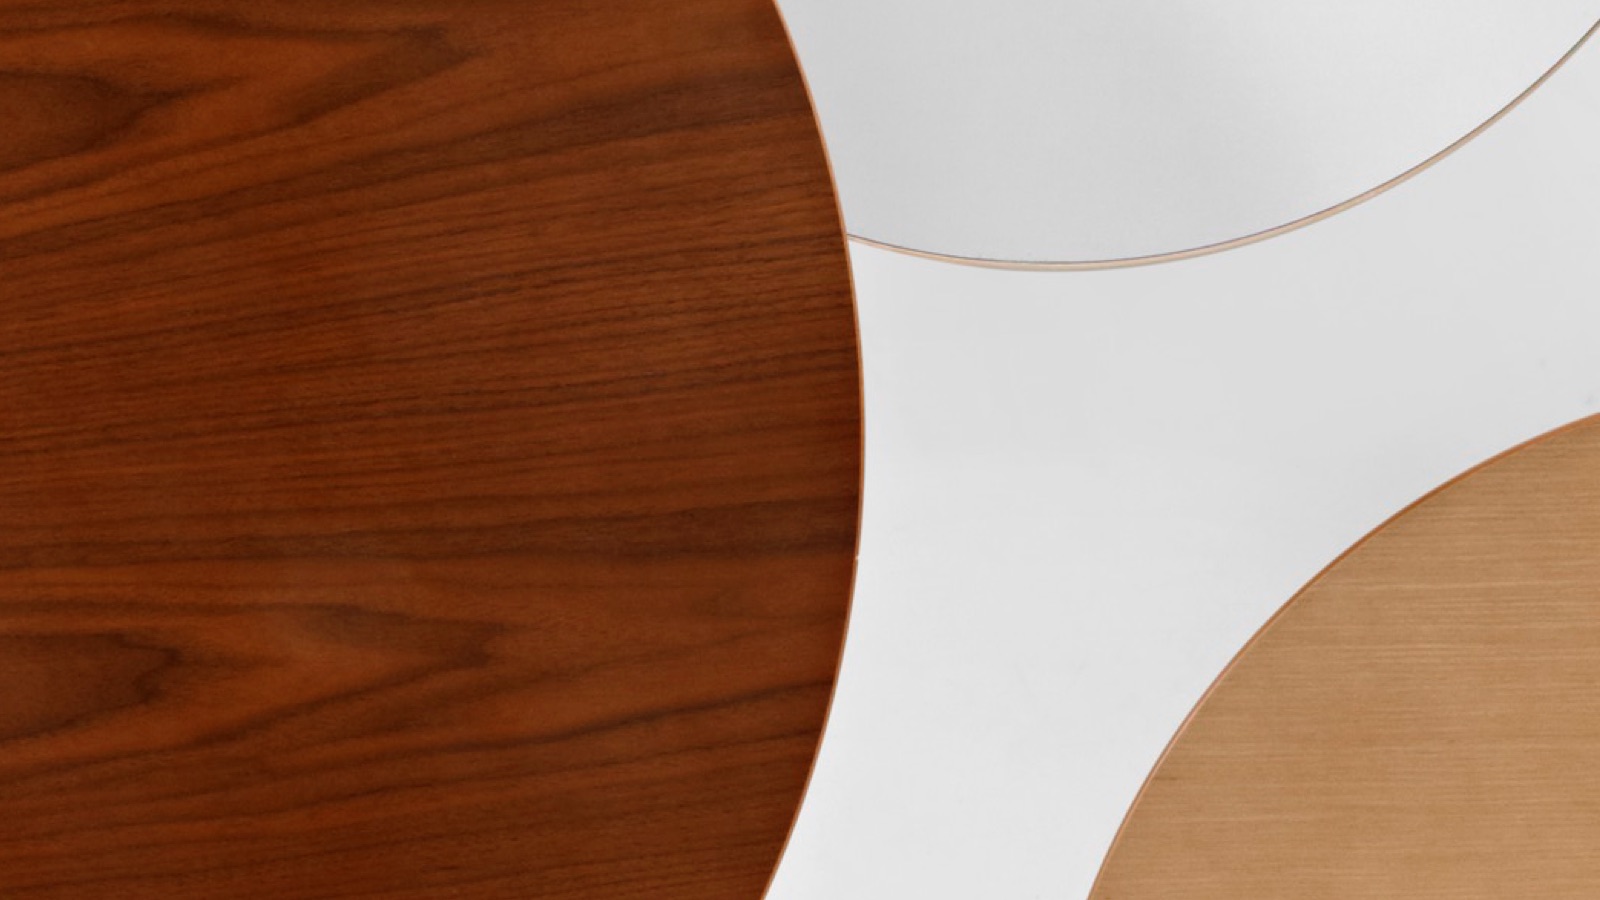 Layered tabletops in a variety of materials including walnut veneer, white laminate, and ash veneer.